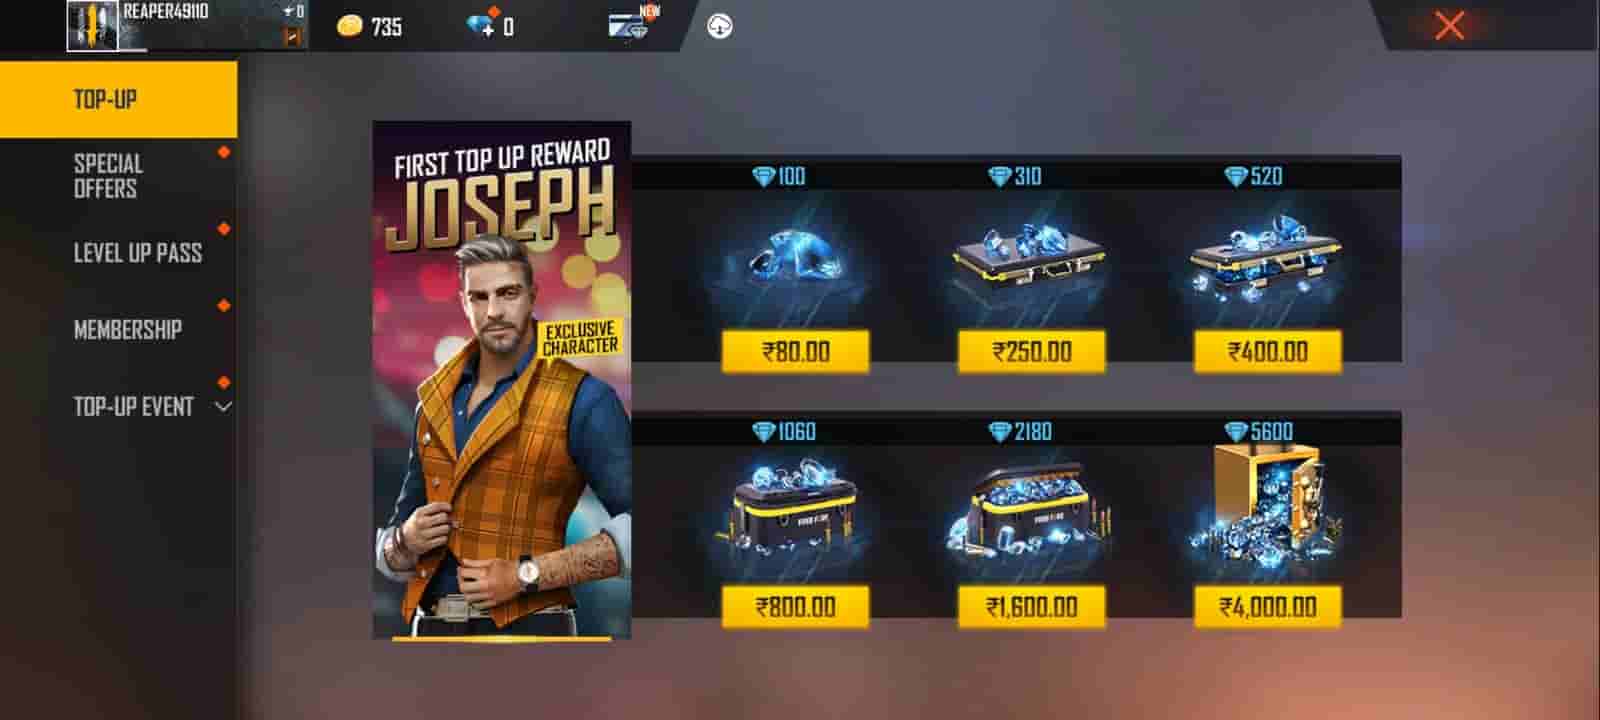 free diamonds in free fire, how to get free diamonds in free fire india, how to get free diamonds in free fire october 2021, free fire 2021, how to get free diamonds in free fire in 2021, free diamonds in free fire india